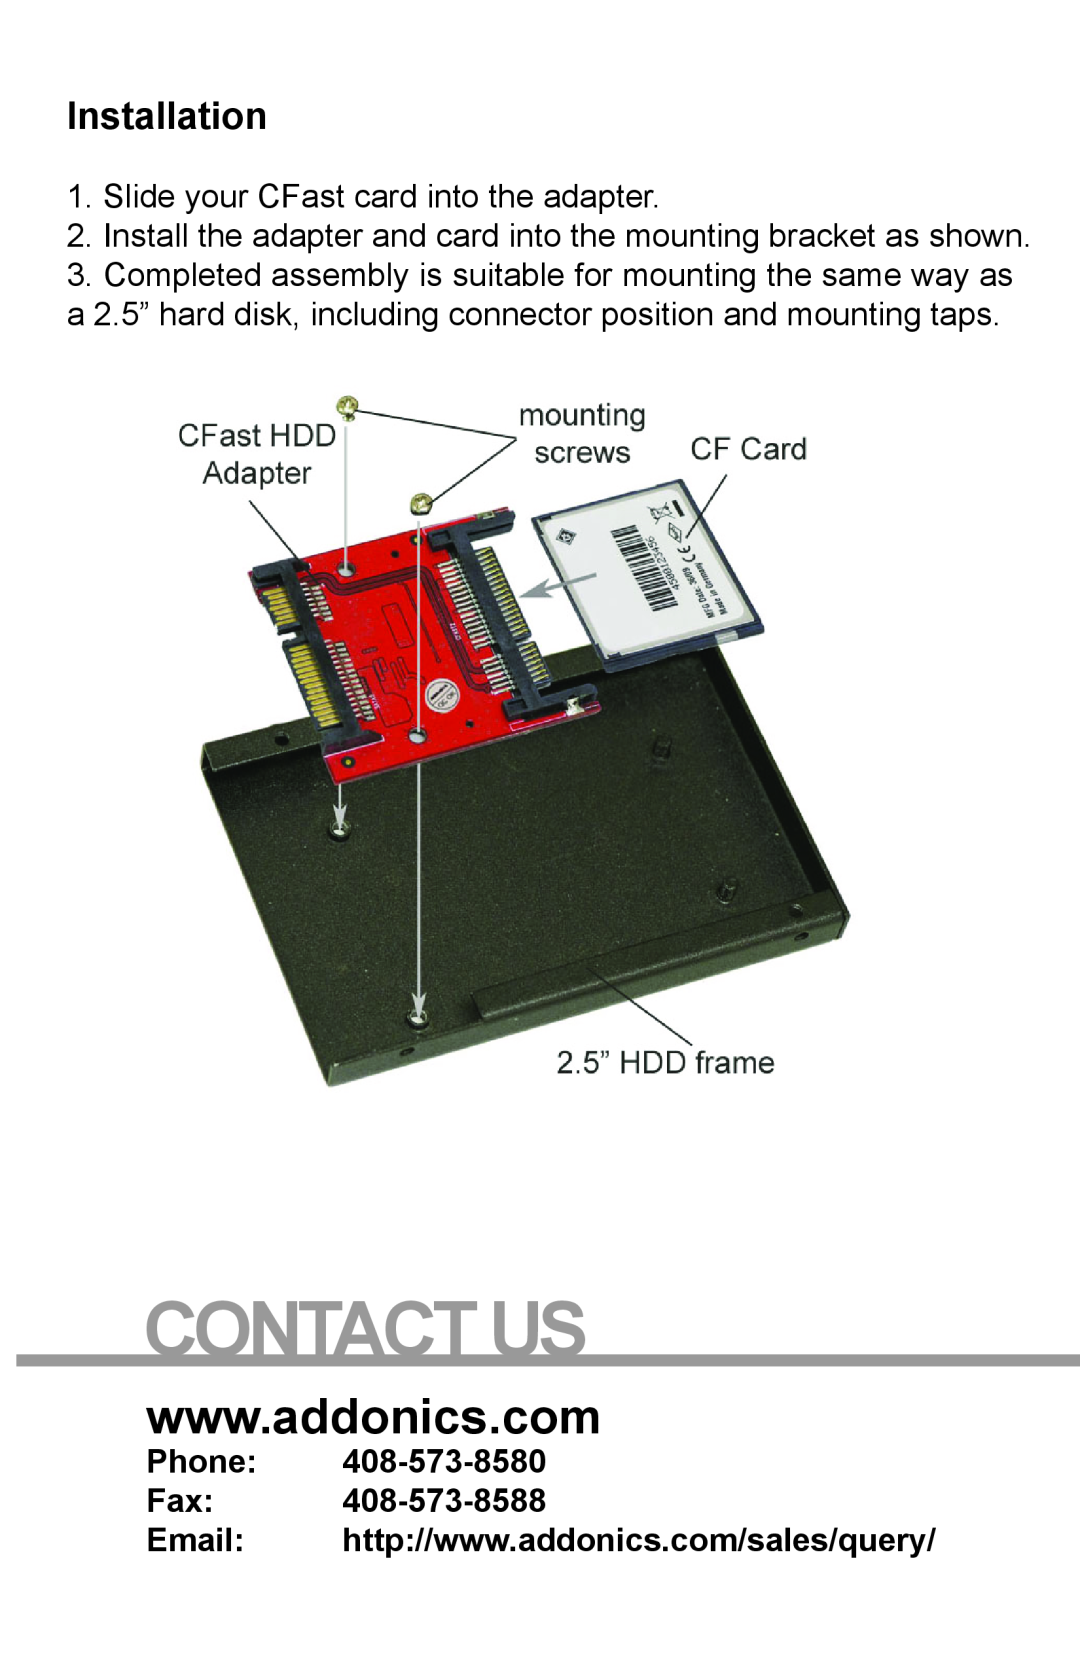 Addonics Technologies AD25CFASTD manual Contact Us, Installation, Slide your CFast card into the adapter, Phone Fax 